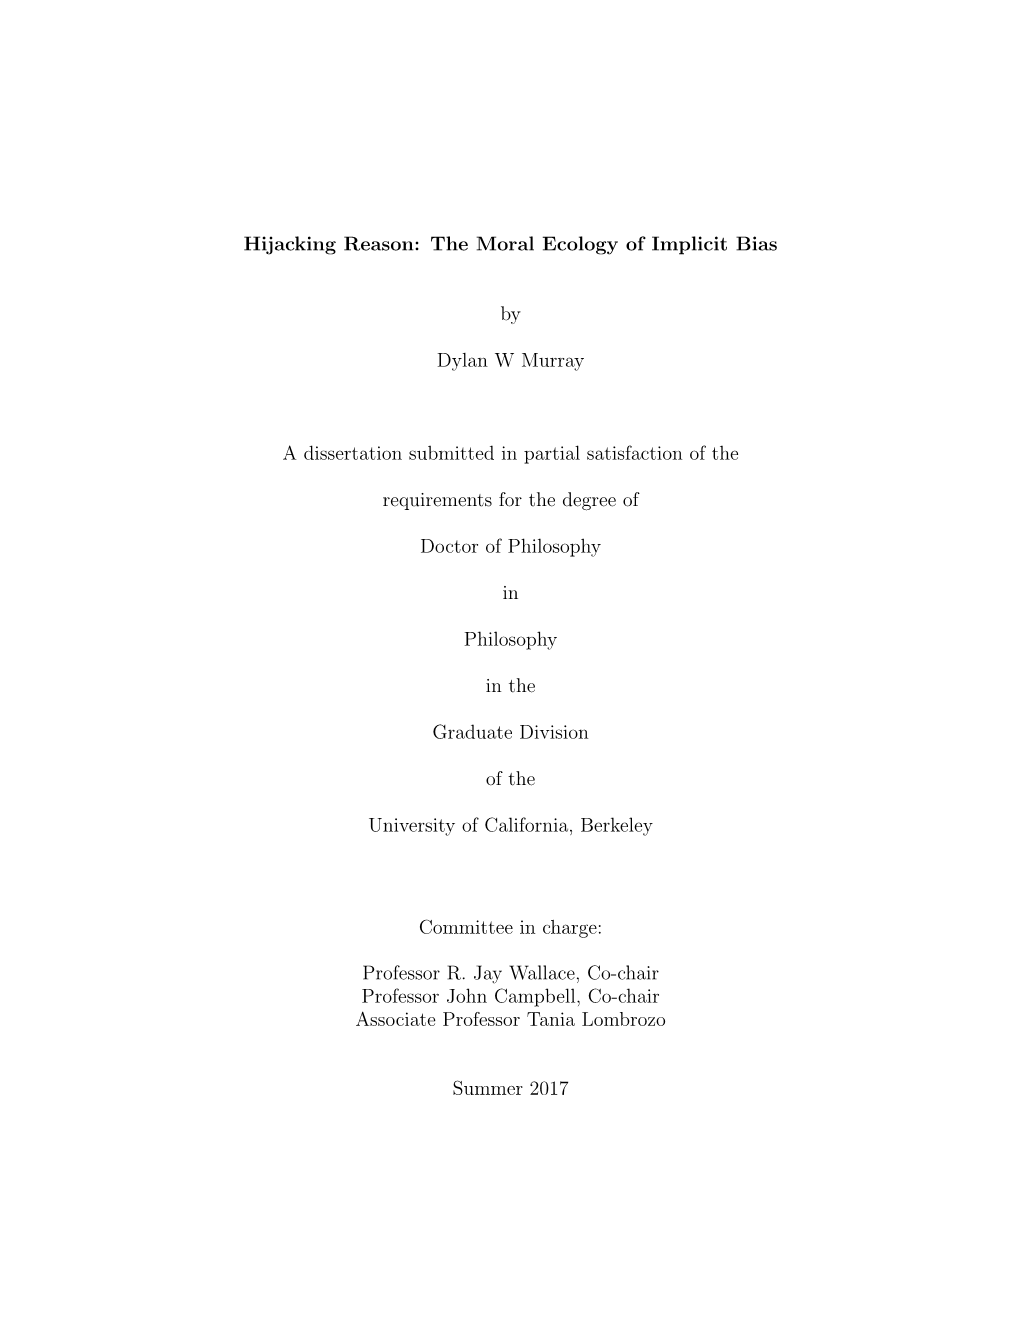 Hijacking Reason: the Moral Ecology of Implicit Bias by Dylan W Murray a Dissertation Submitted in Partial Satisfaction of the R